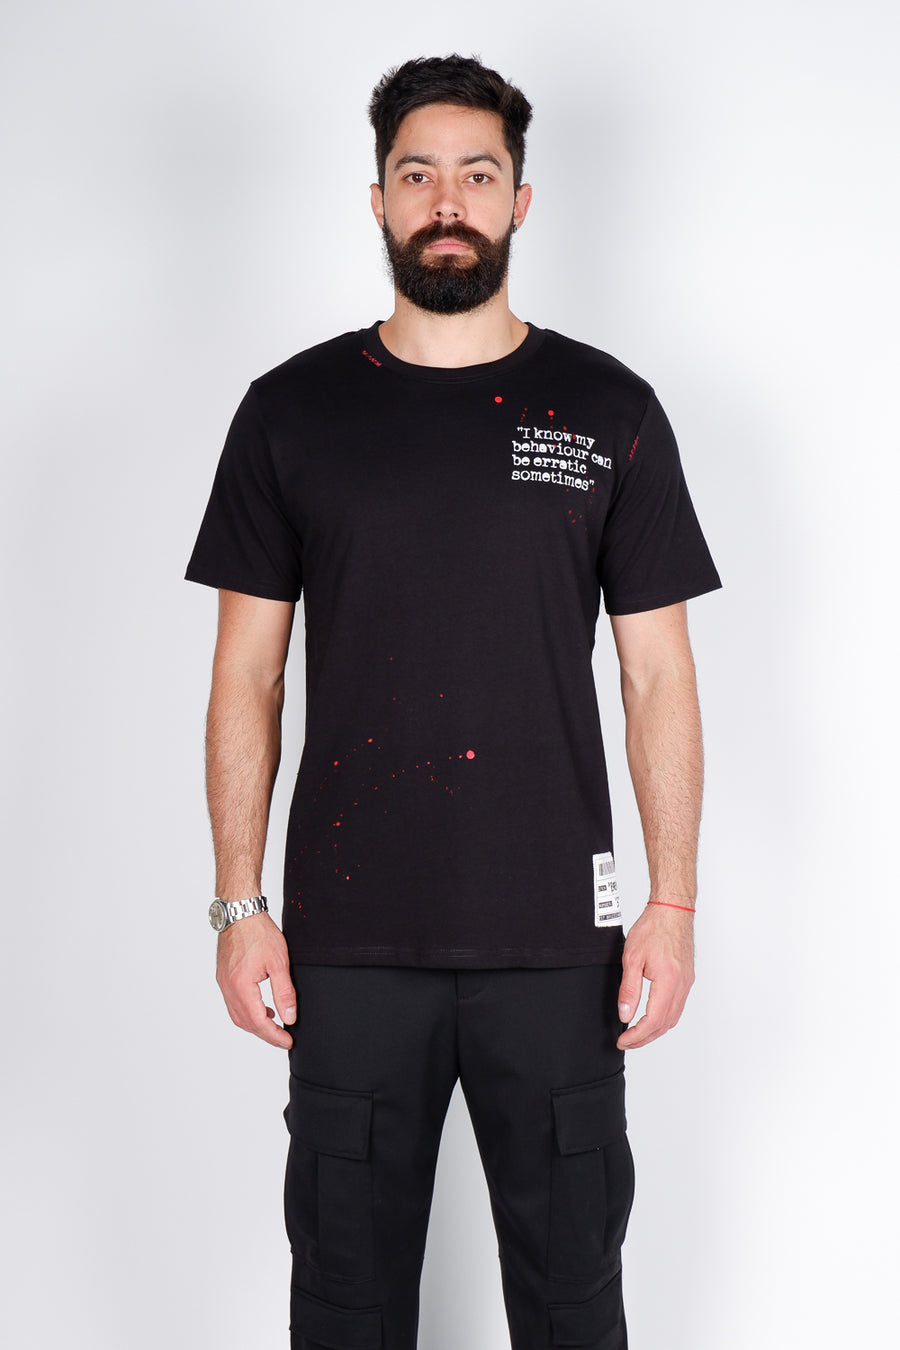 Buy the ABE Bateman T-Shirt in Black at Intro. Spend £50 for free UK delivery. Official stockists. We ship worldwide.